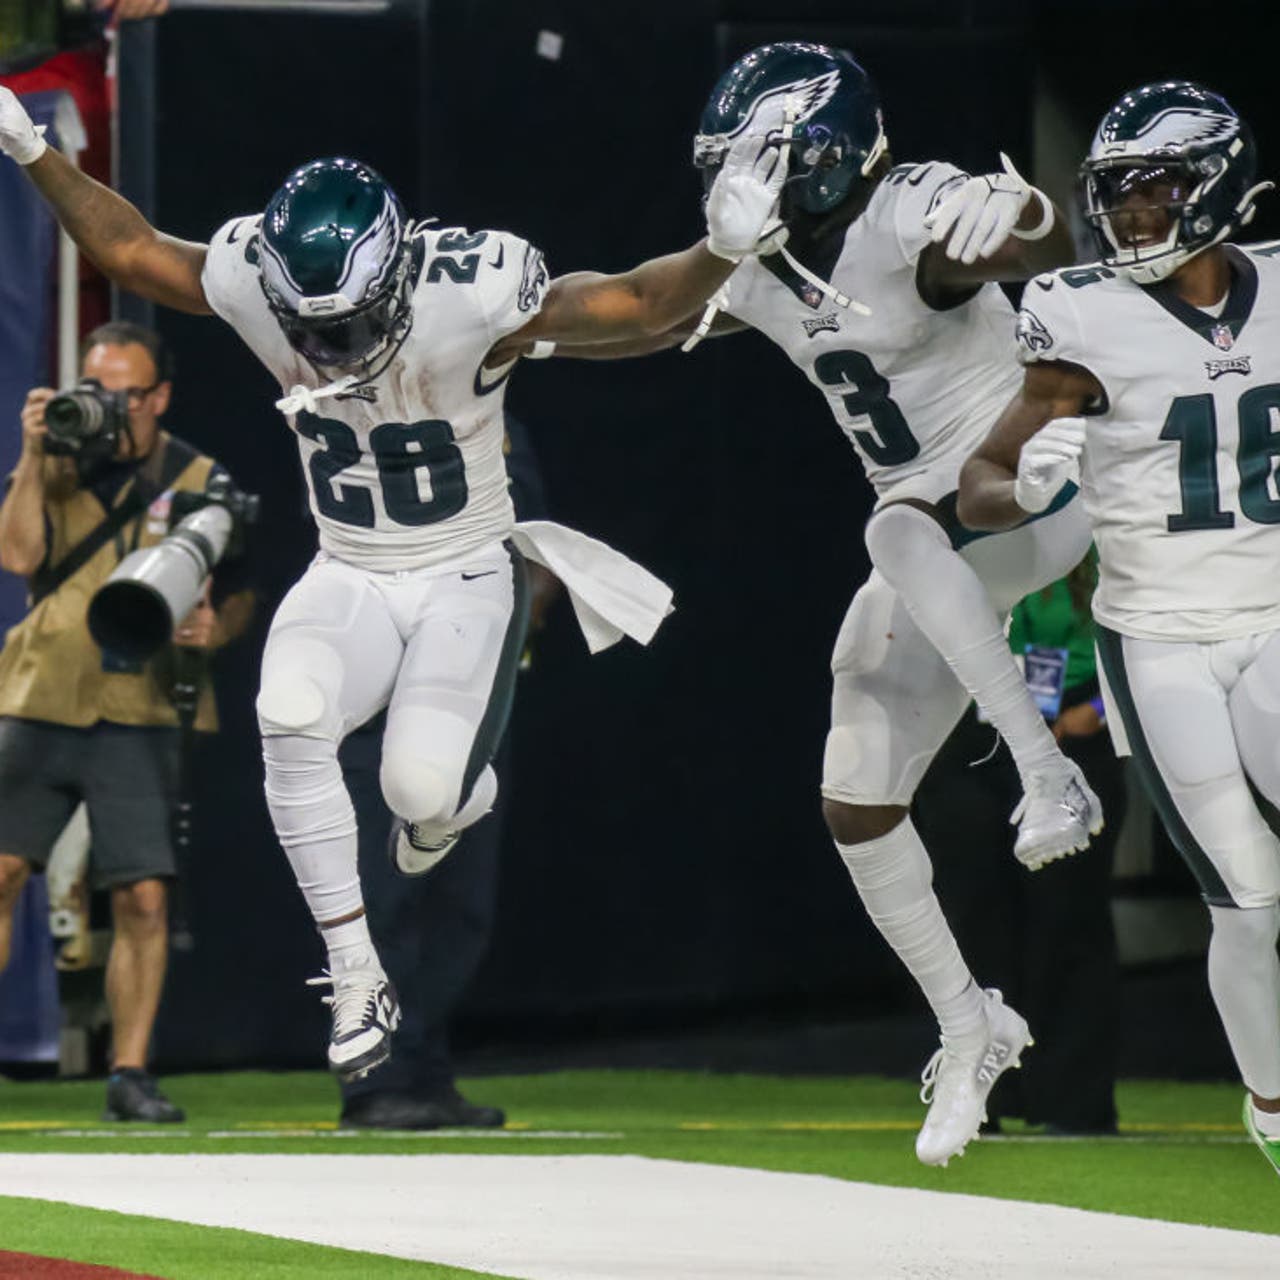 The Philadelphia Eagles are still undefeated but barely